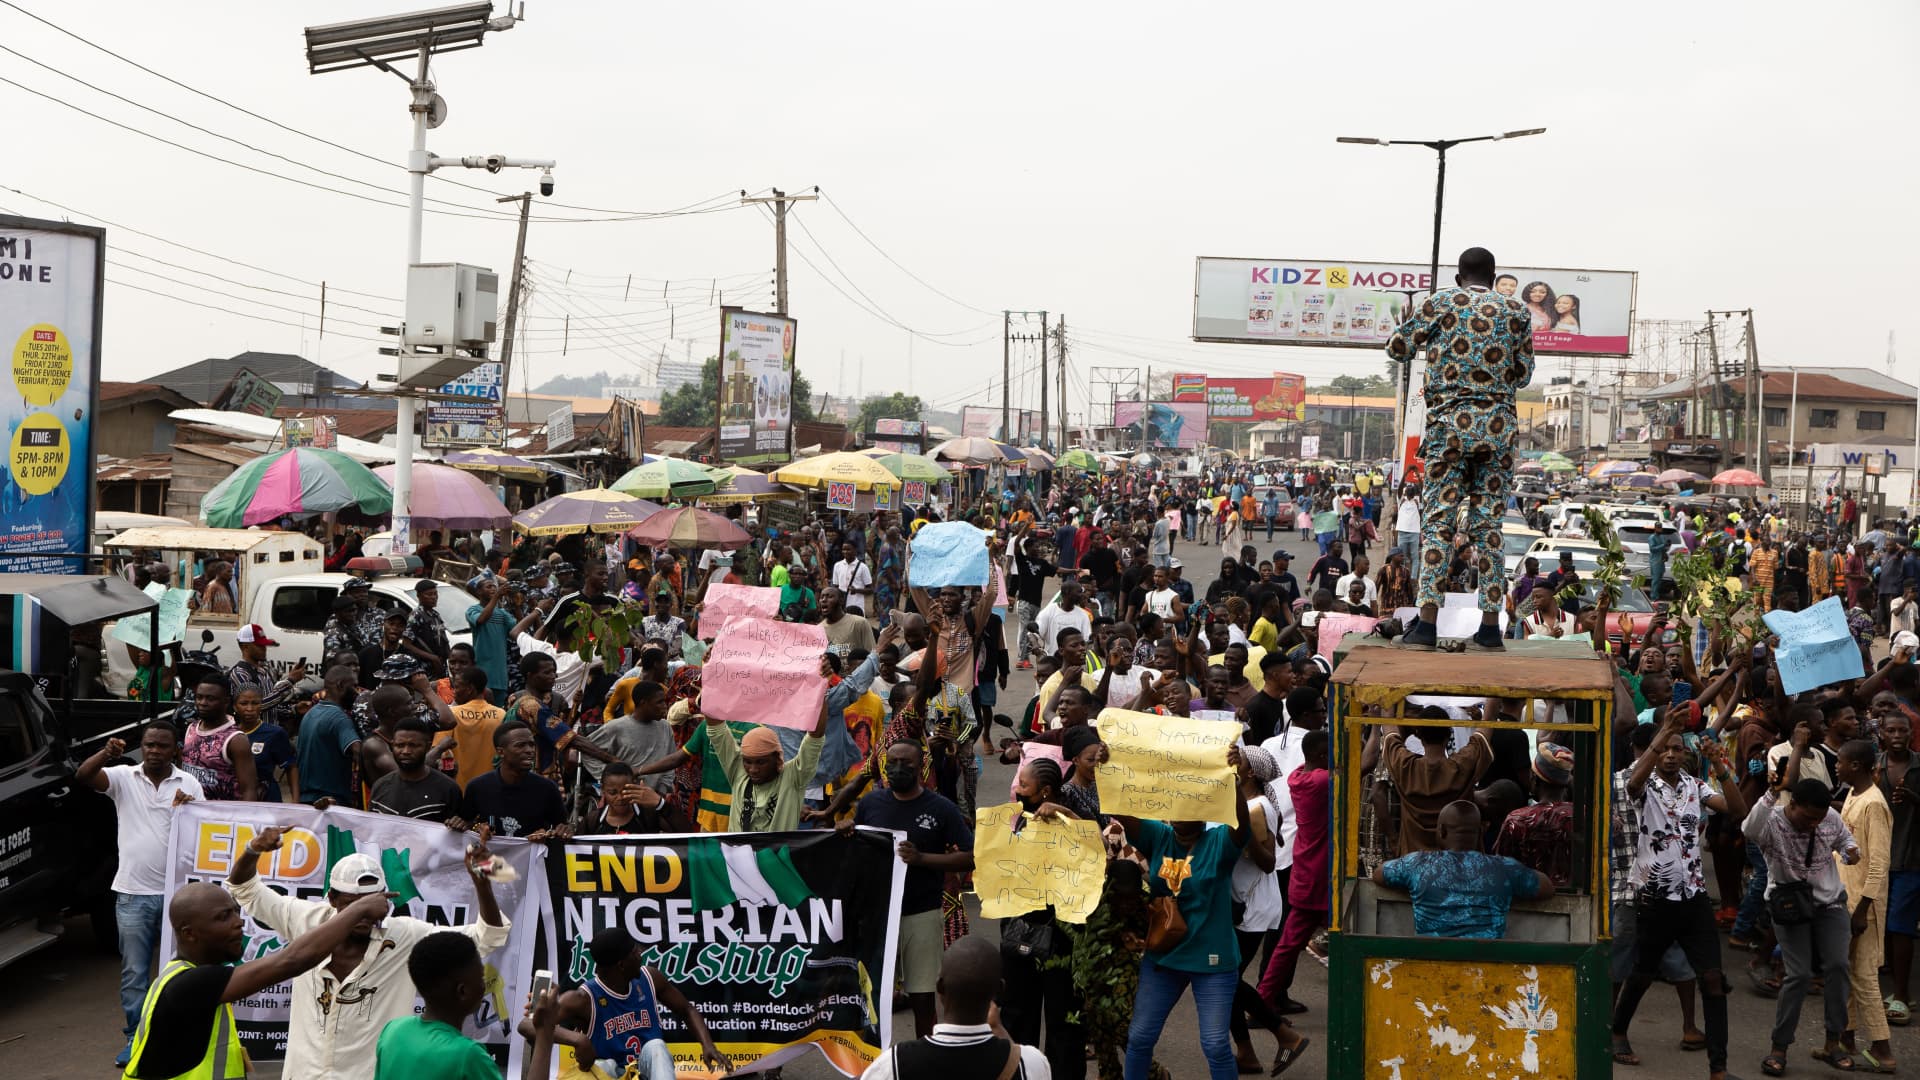 IBADAN, Nigeria - Feb. 19, 2024: Demonstrators are seen at a protest against the hike in price and hard living conditions in Ibadan on February 19, 2024.